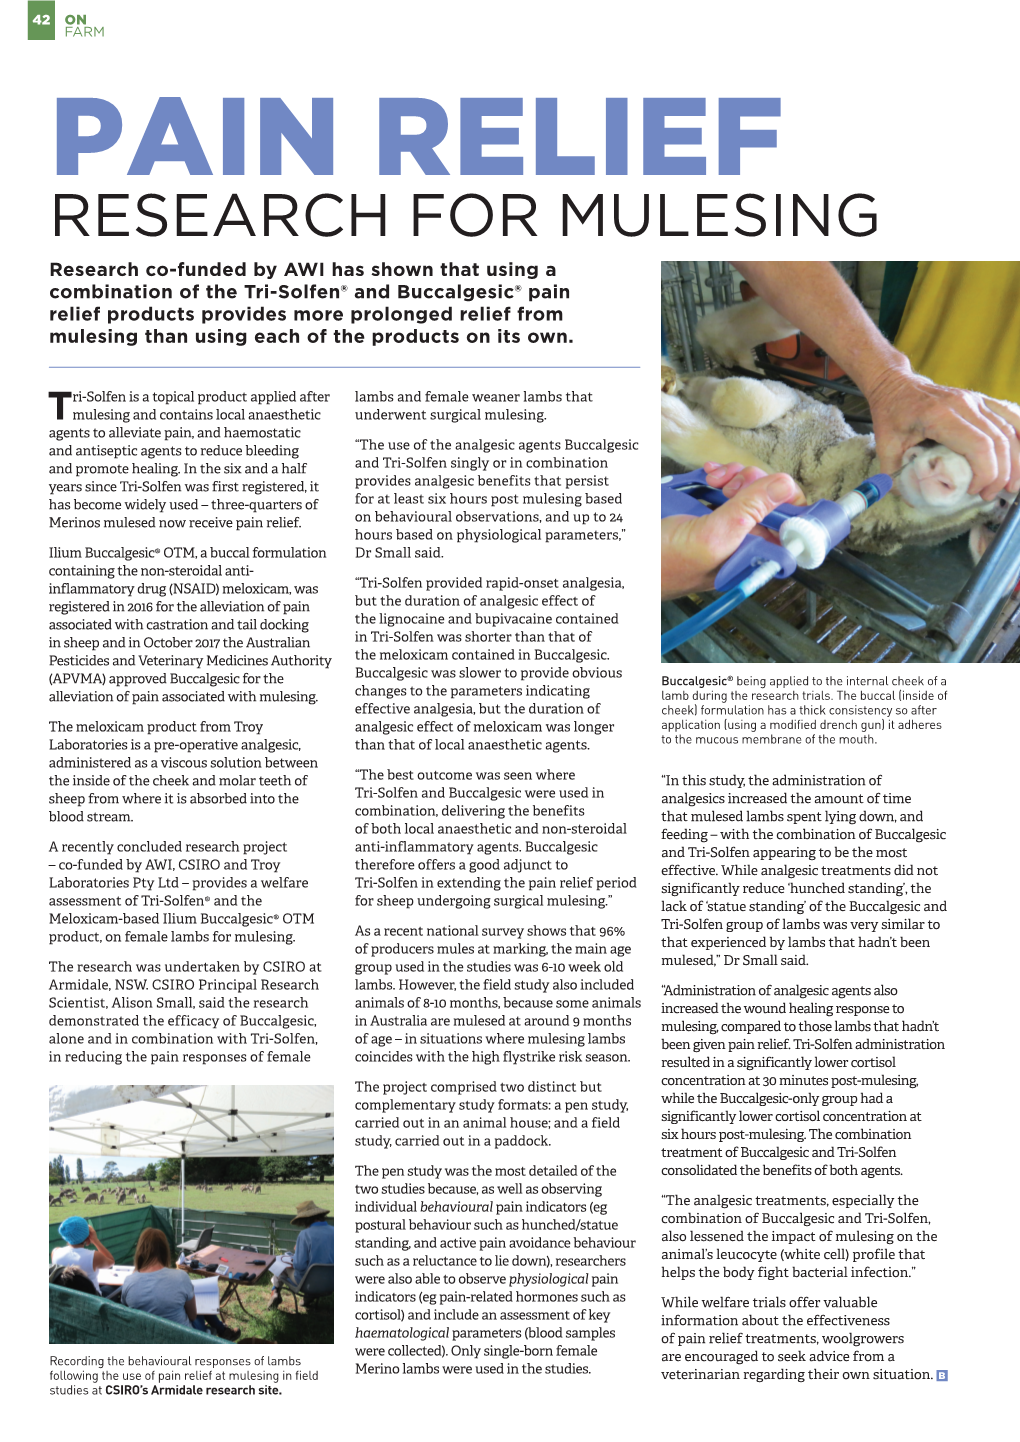 Pain Relief Research for Mulesing